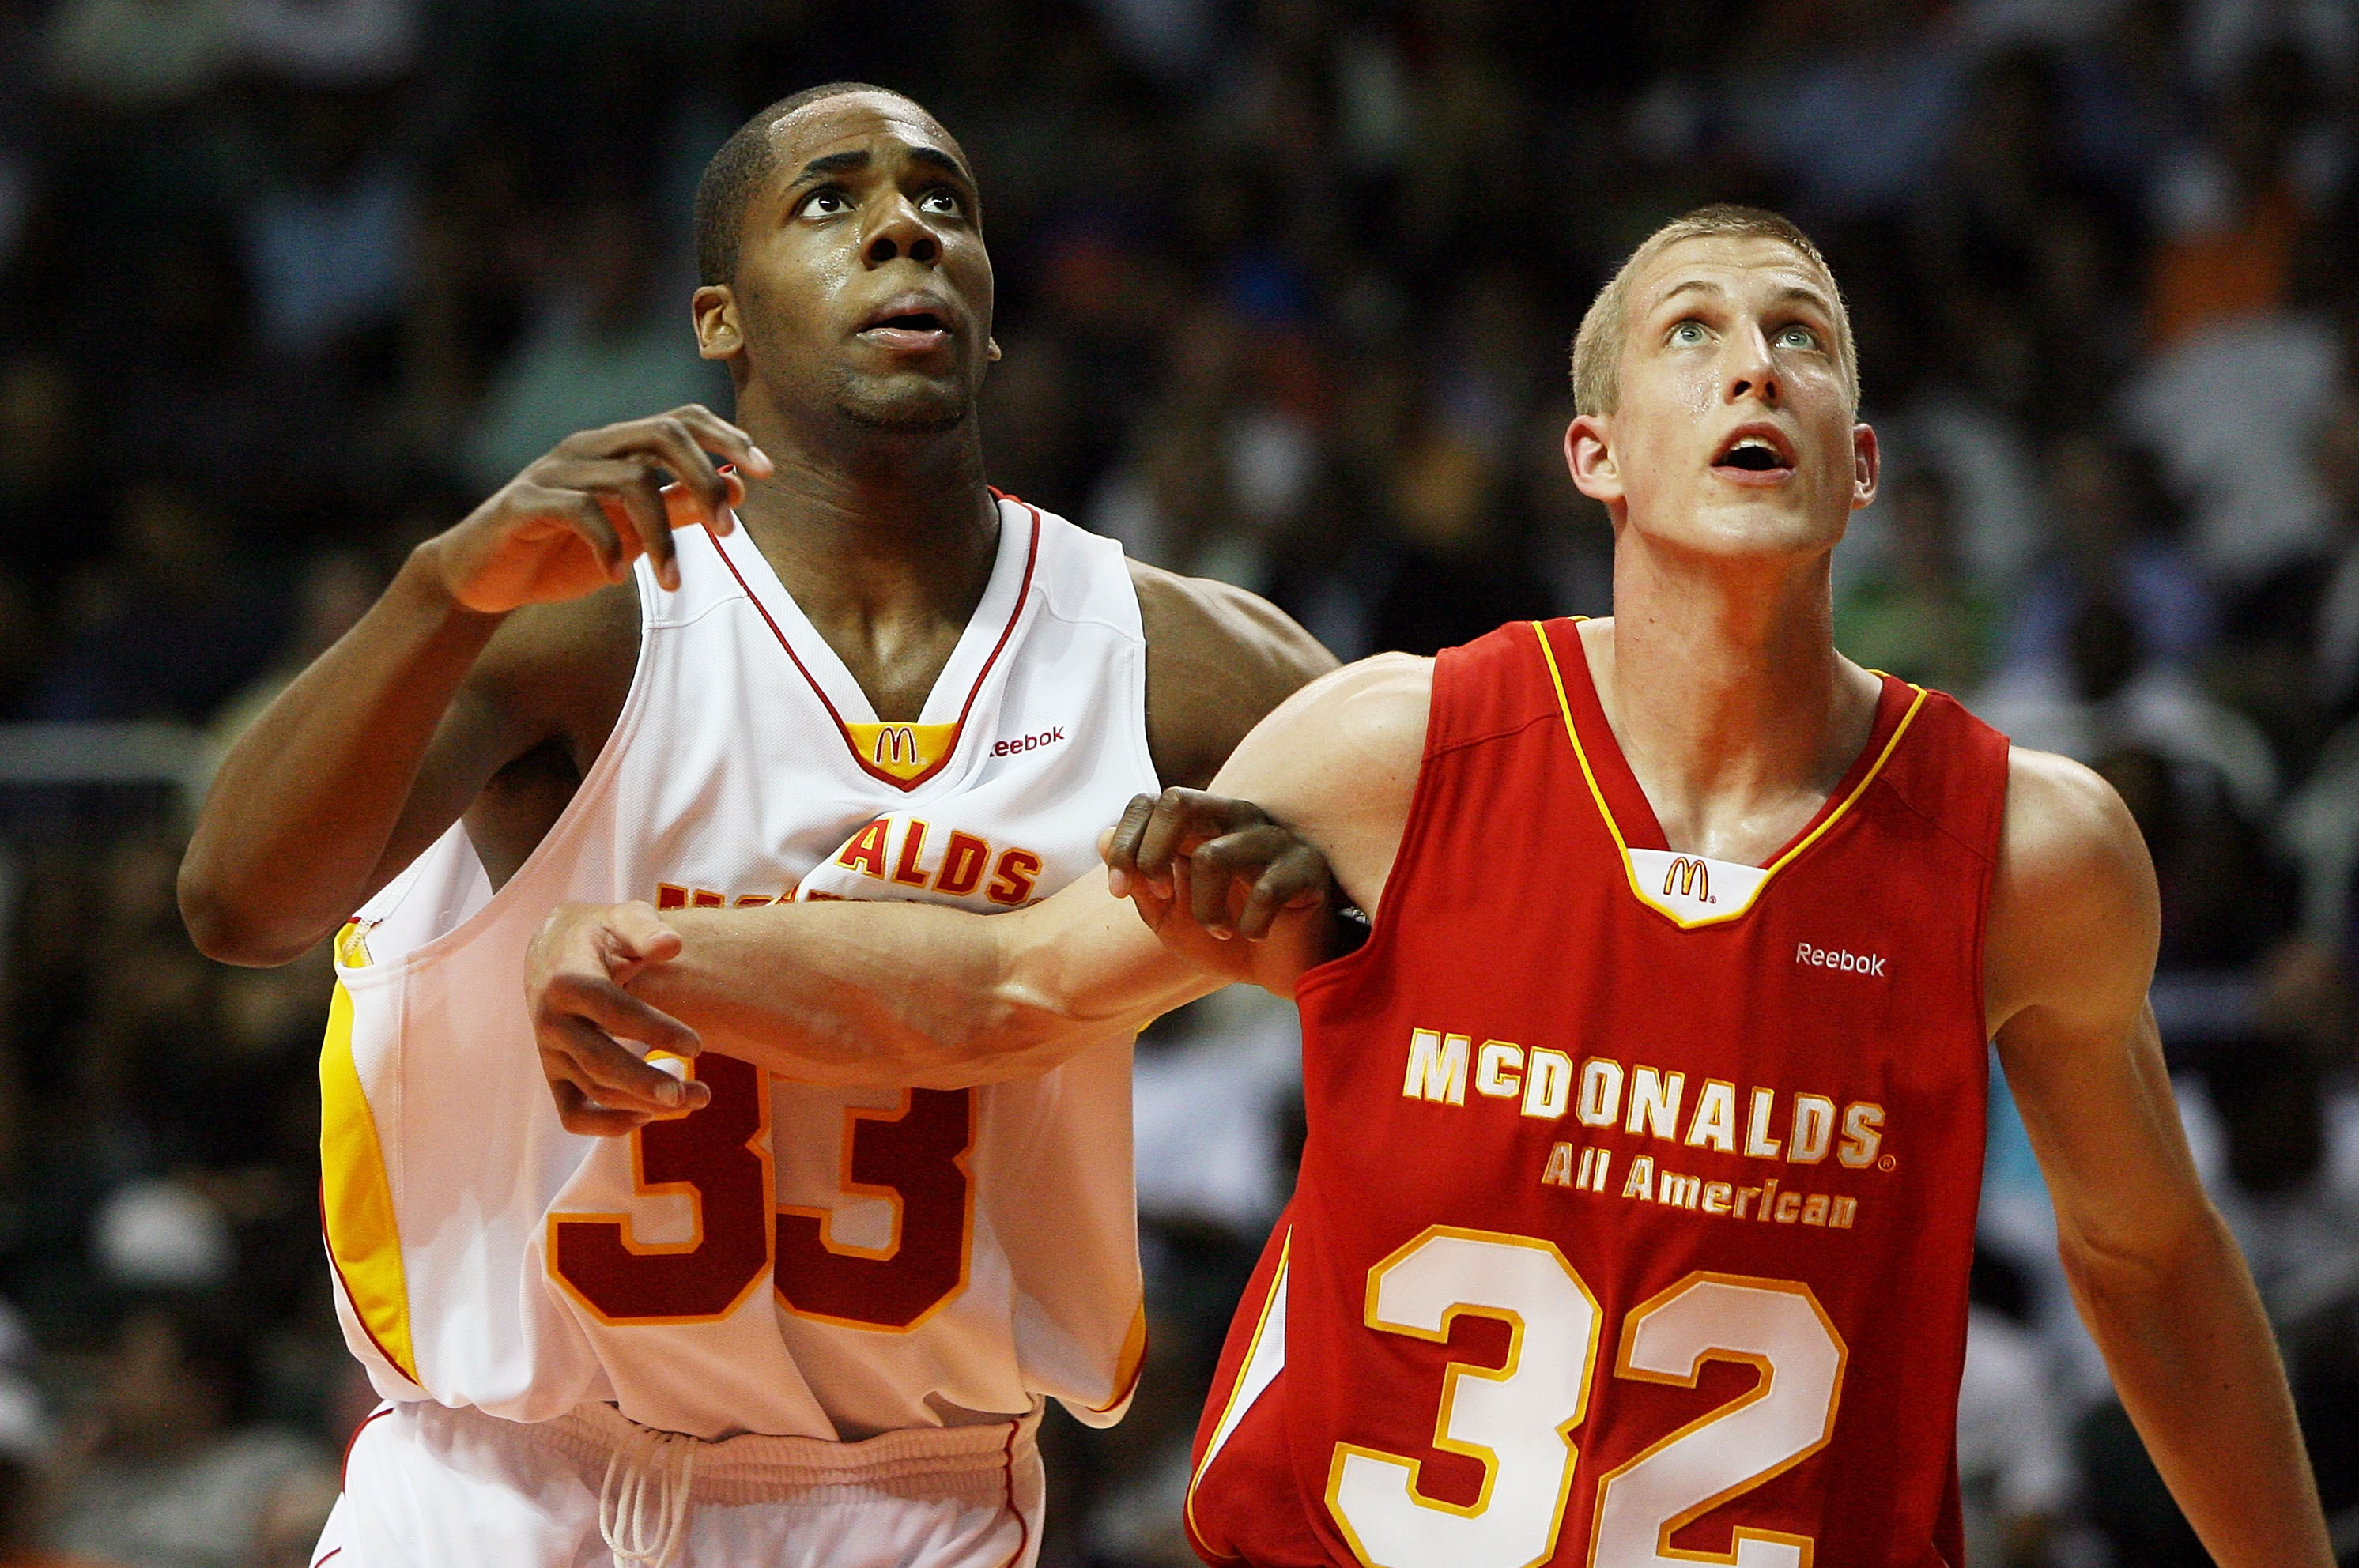 McDonald's All-American Game 2012: Tyler Lewis and Other Top Must